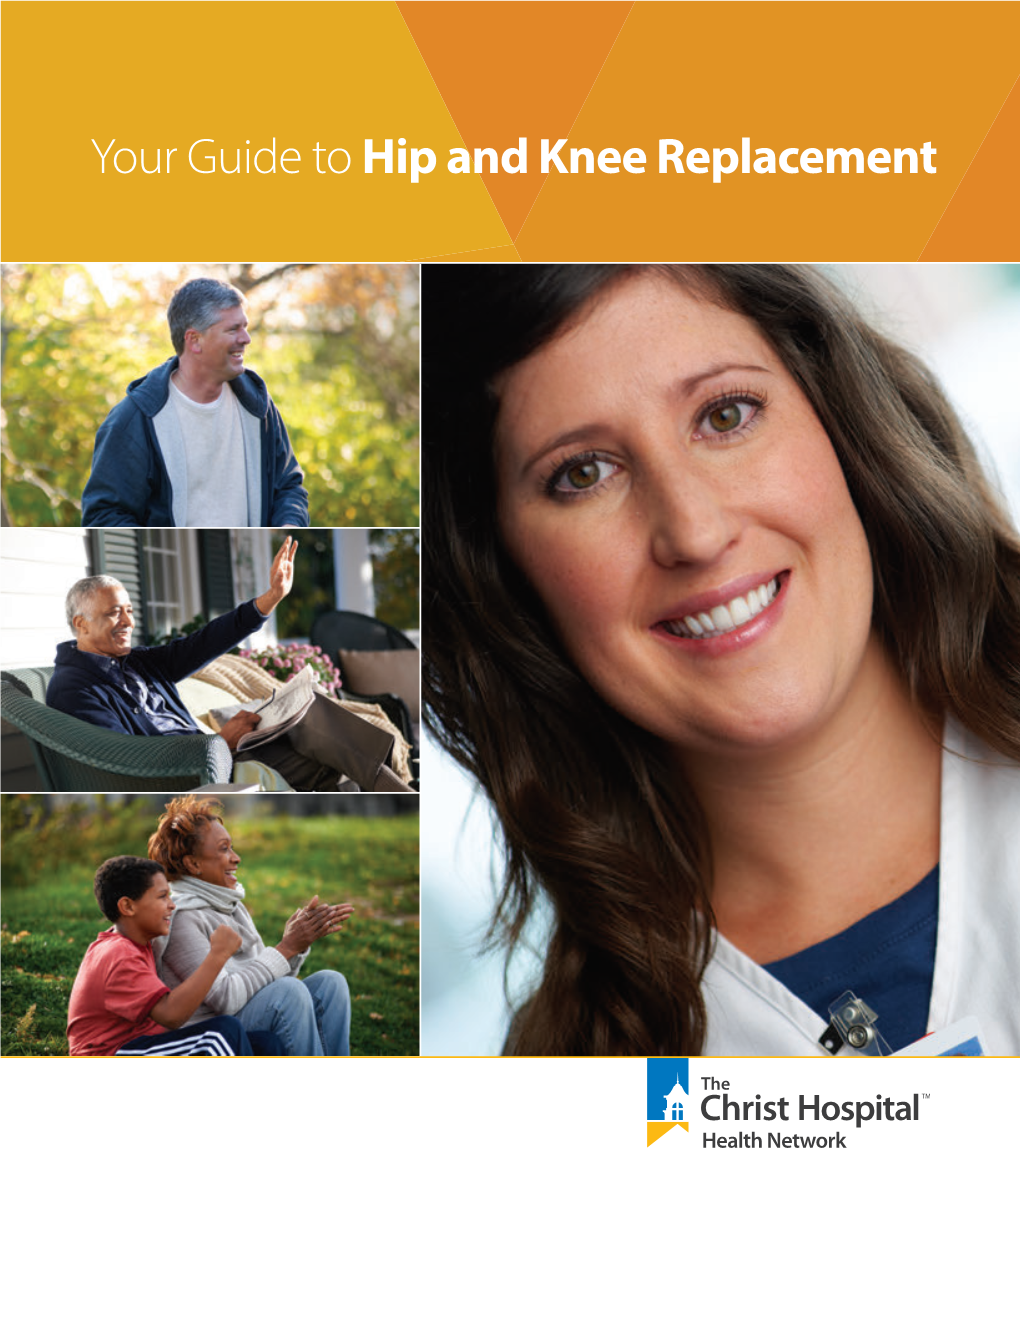 Your Guide to Hip and Knee Replacement